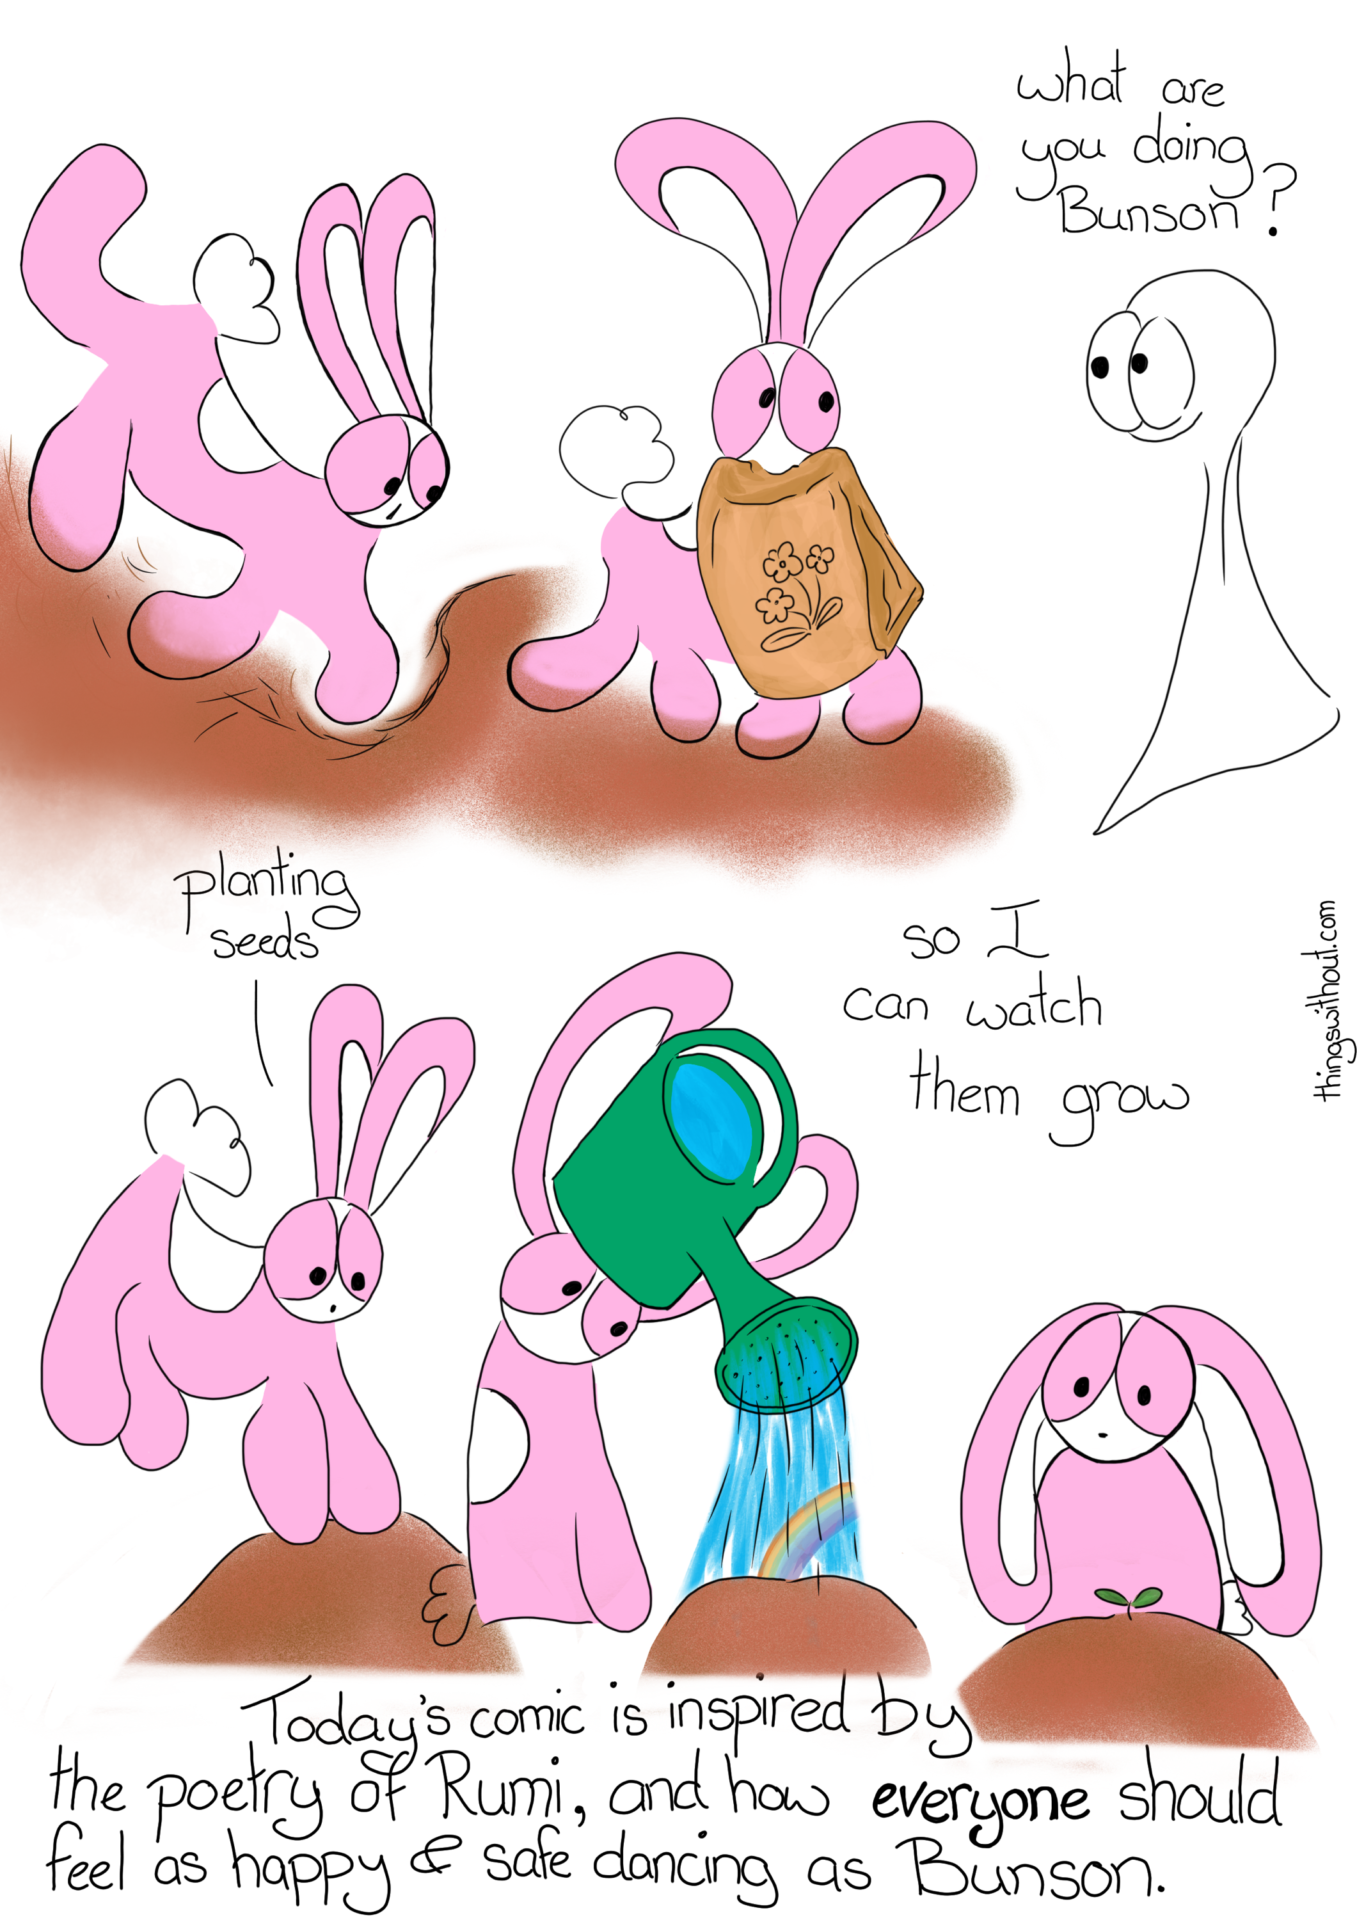 In Memory of Pulse. Bunnies Dance, Bunnies Plant Seeds, and Tend to Them (Comic #491)